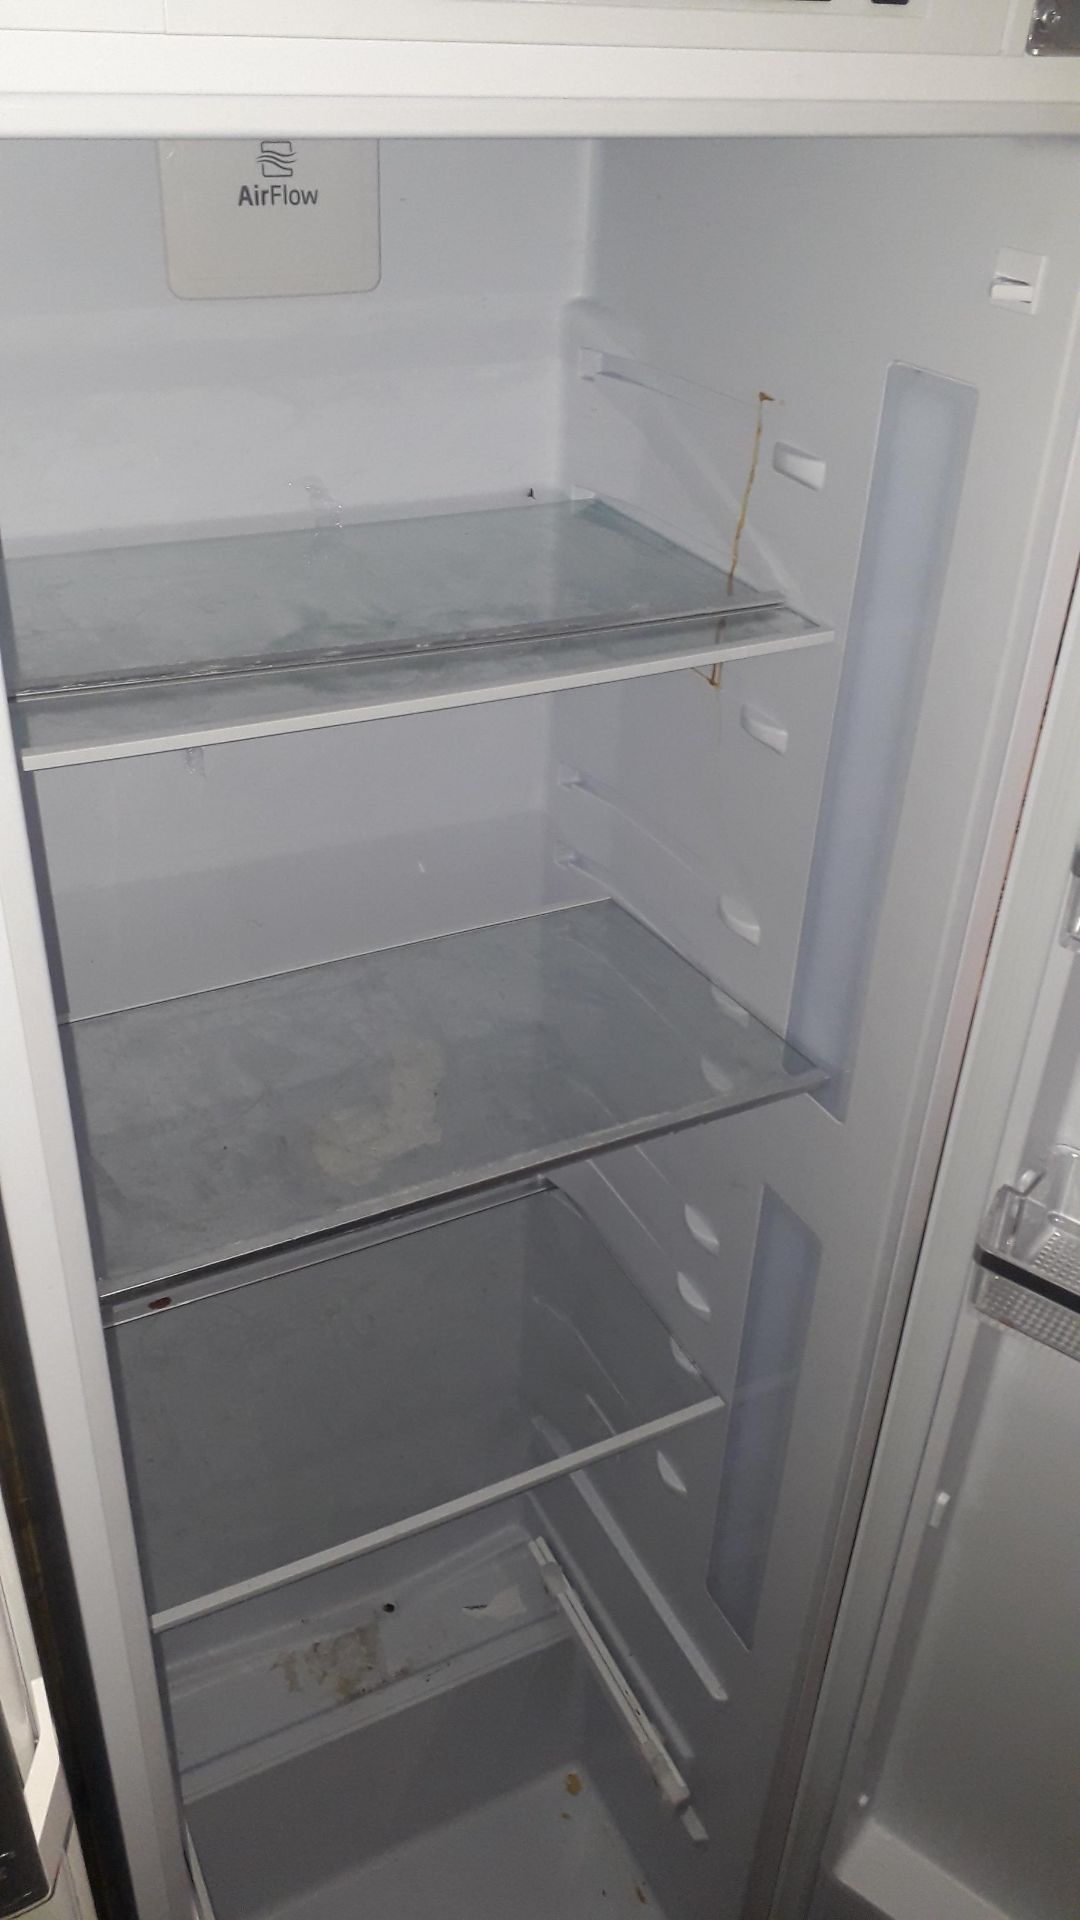 Montpellier MITL325 Tall integrated 316ltr Larder Fridge, serial number MONMON34MEAA 20123040 - Image 2 of 3